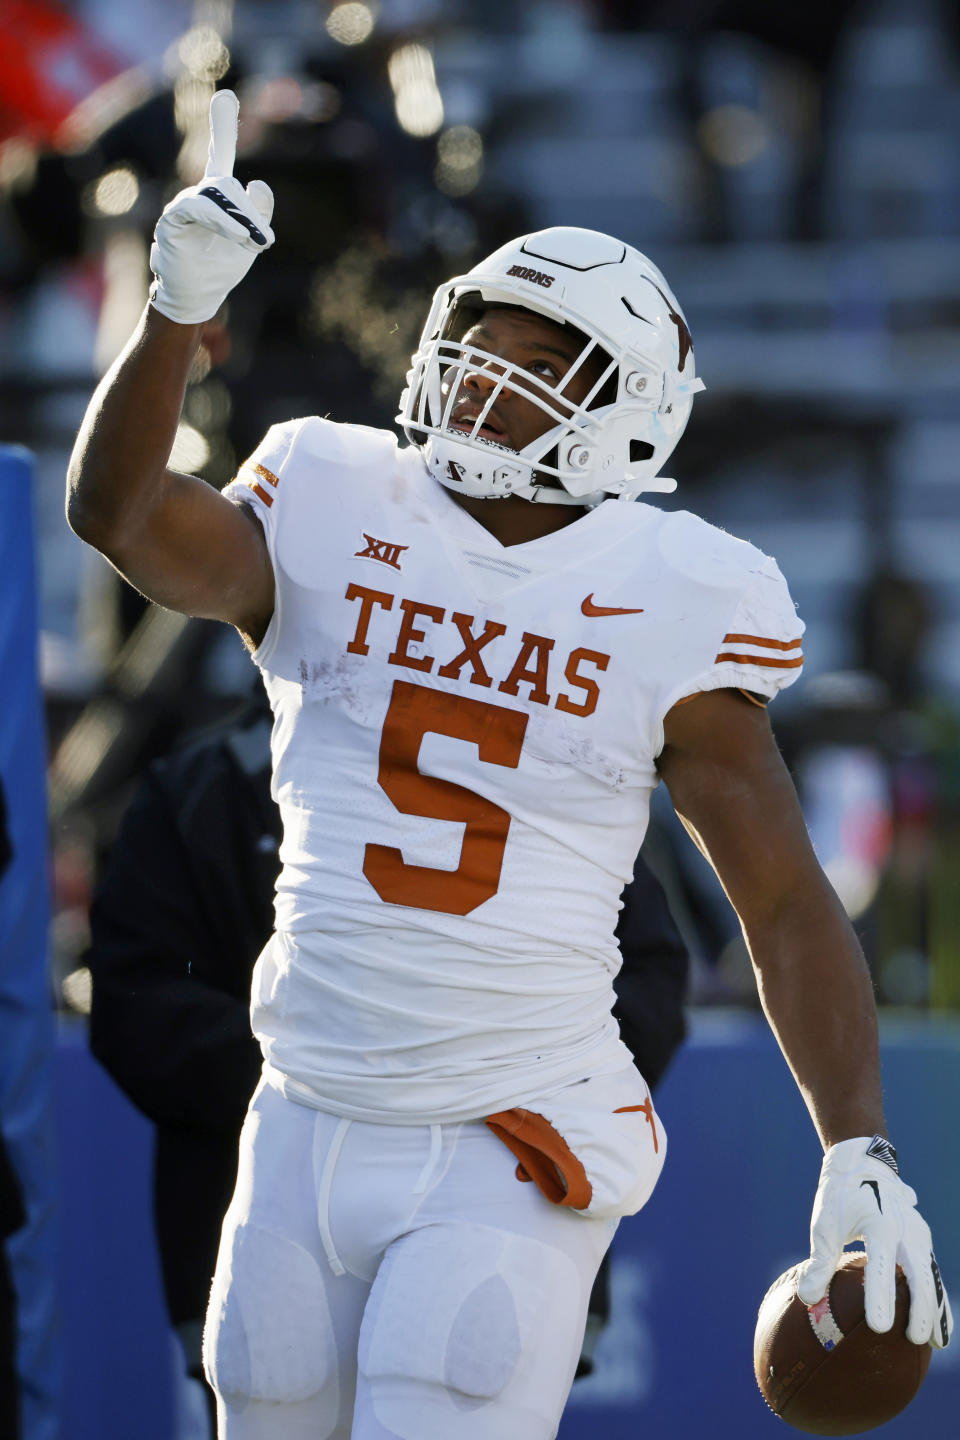 Texas running back Bijan Robinson celebrates after scoring a touchdown against Kansas during the second quarter of an NCAA college football game on Saturday, Nov. 19, 2022, in Lawrence, Kan. (AP Photo/Colin E. Braley)